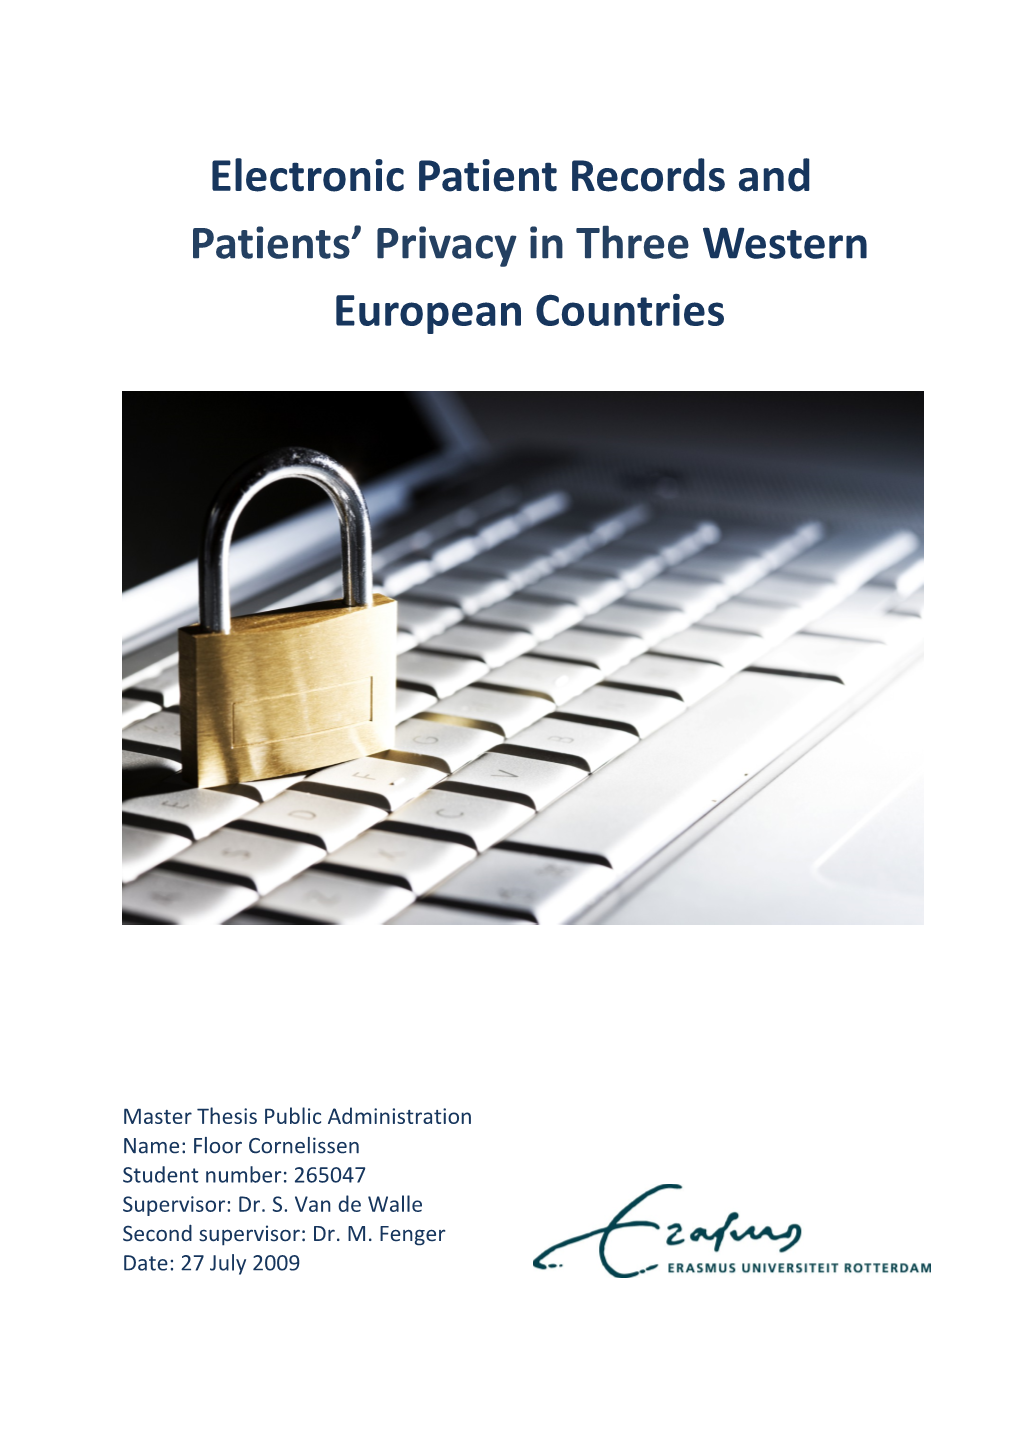 Electronic Patient Records and Patients Privacy in Three Western European Countries